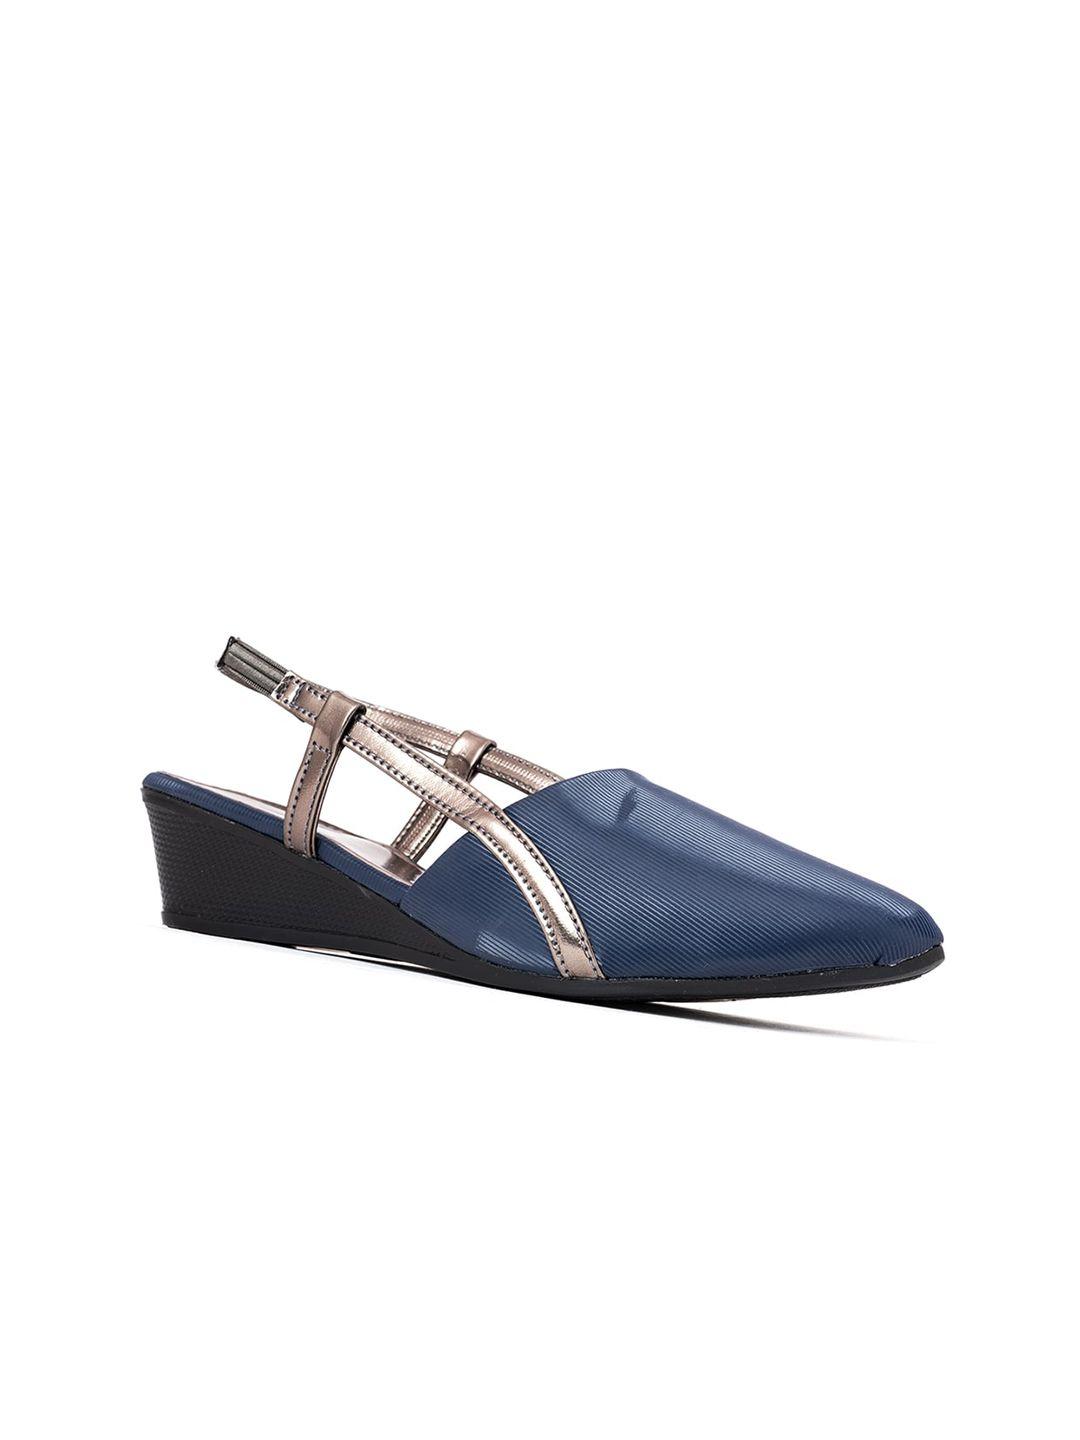 khadims-navy-blue-colourblocked-wedge-pumps-with-buckles